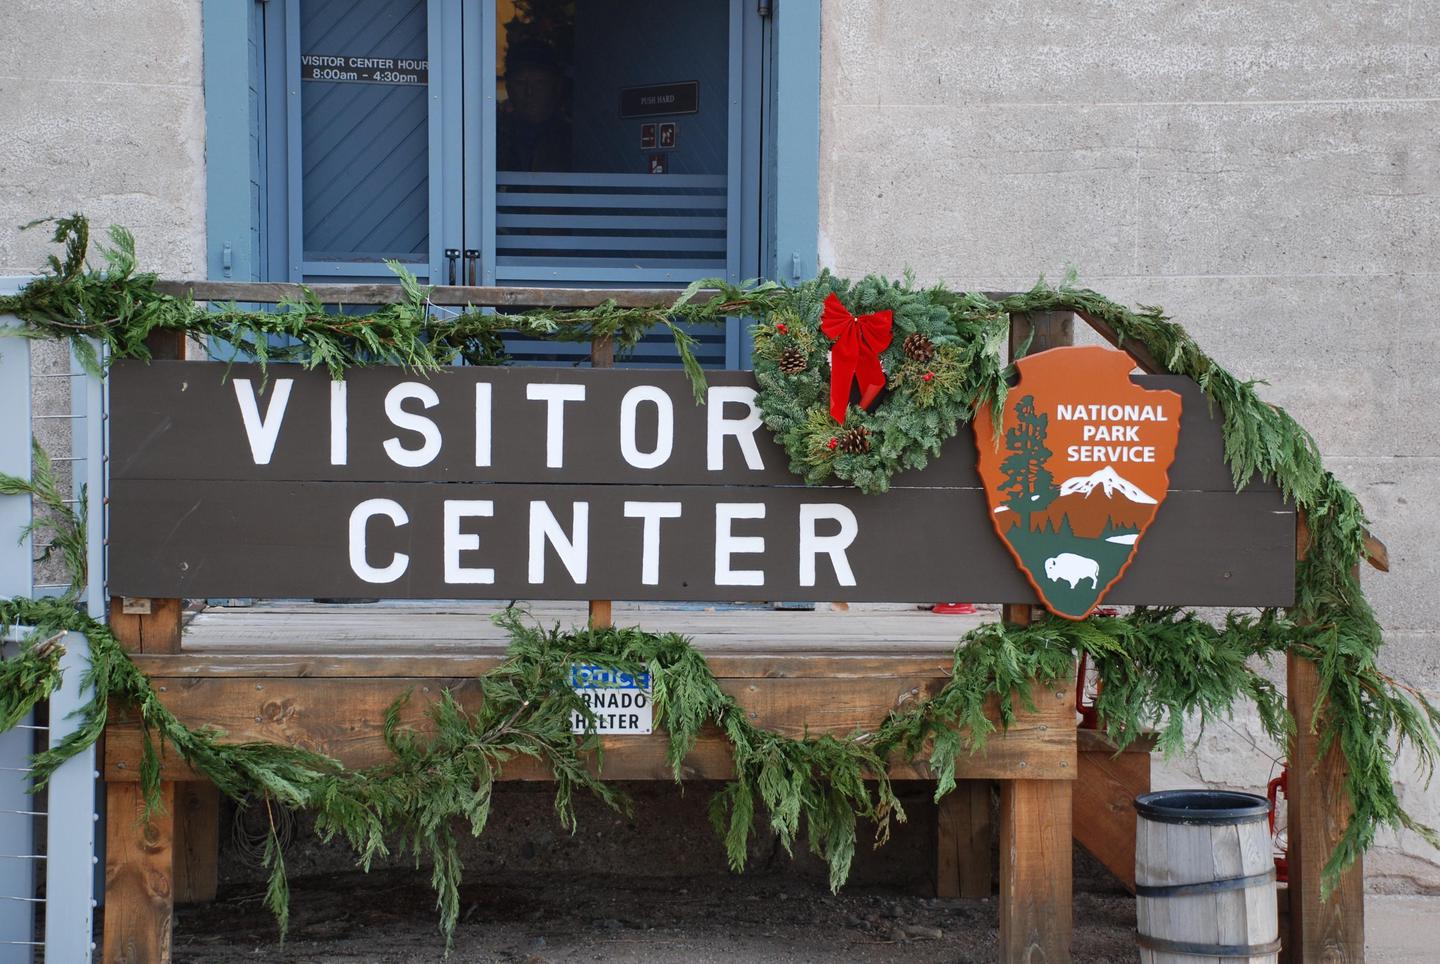 Visitor Center with Holiday DecorationsHolidays at Fort Laramie Visitor Center